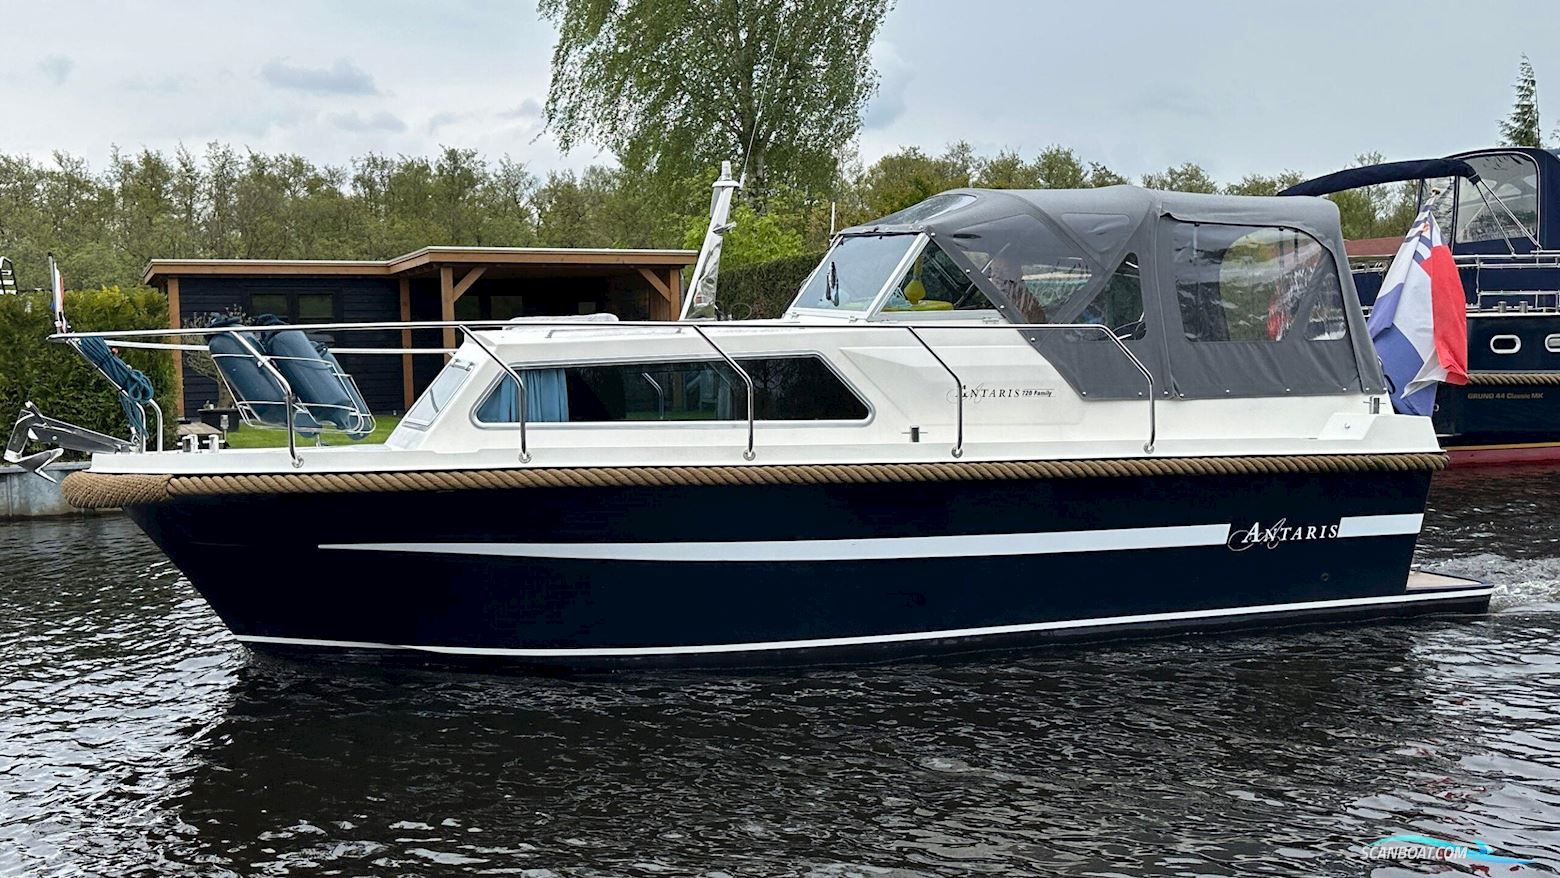 Antaris 7.20 Family Motor boat 2006, with Vetus engine, The Netherlands